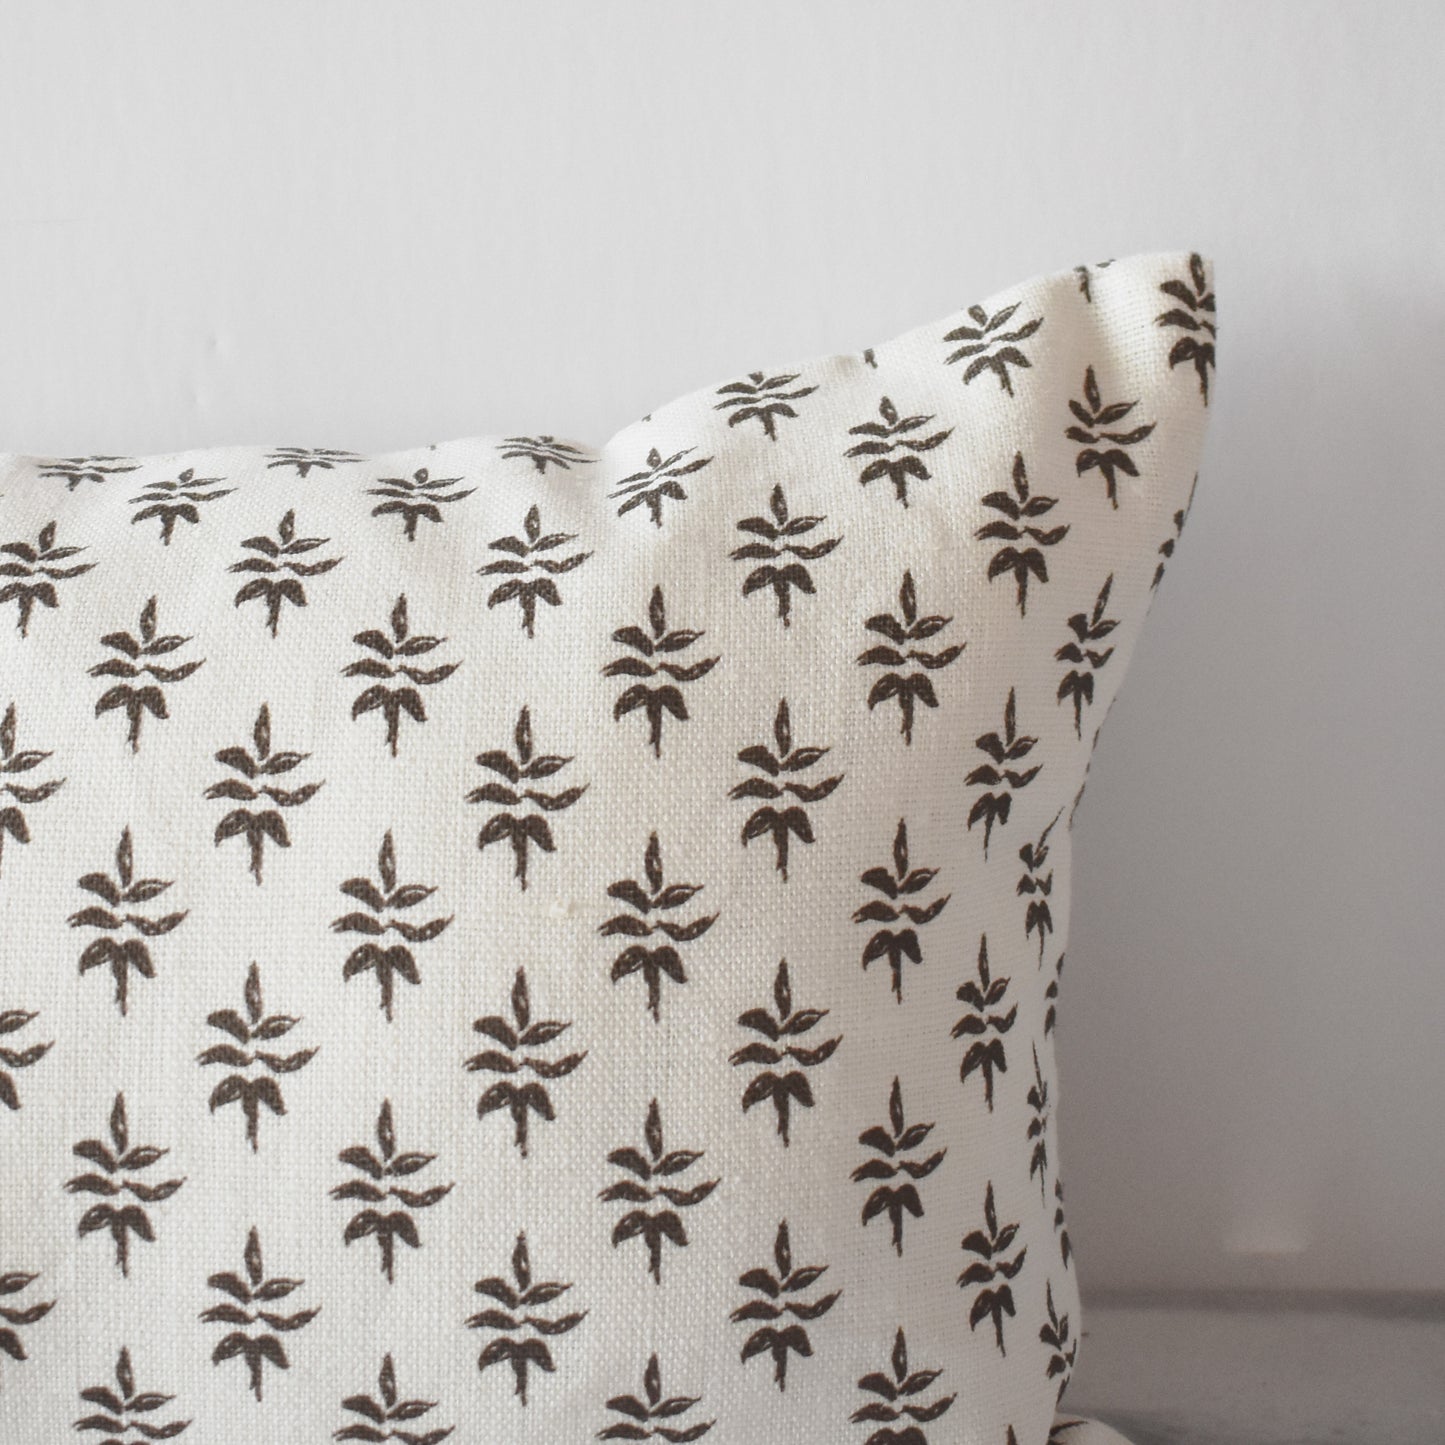 Laurel Leaf Pillow in Chocolate & Oyster - 12"x20"